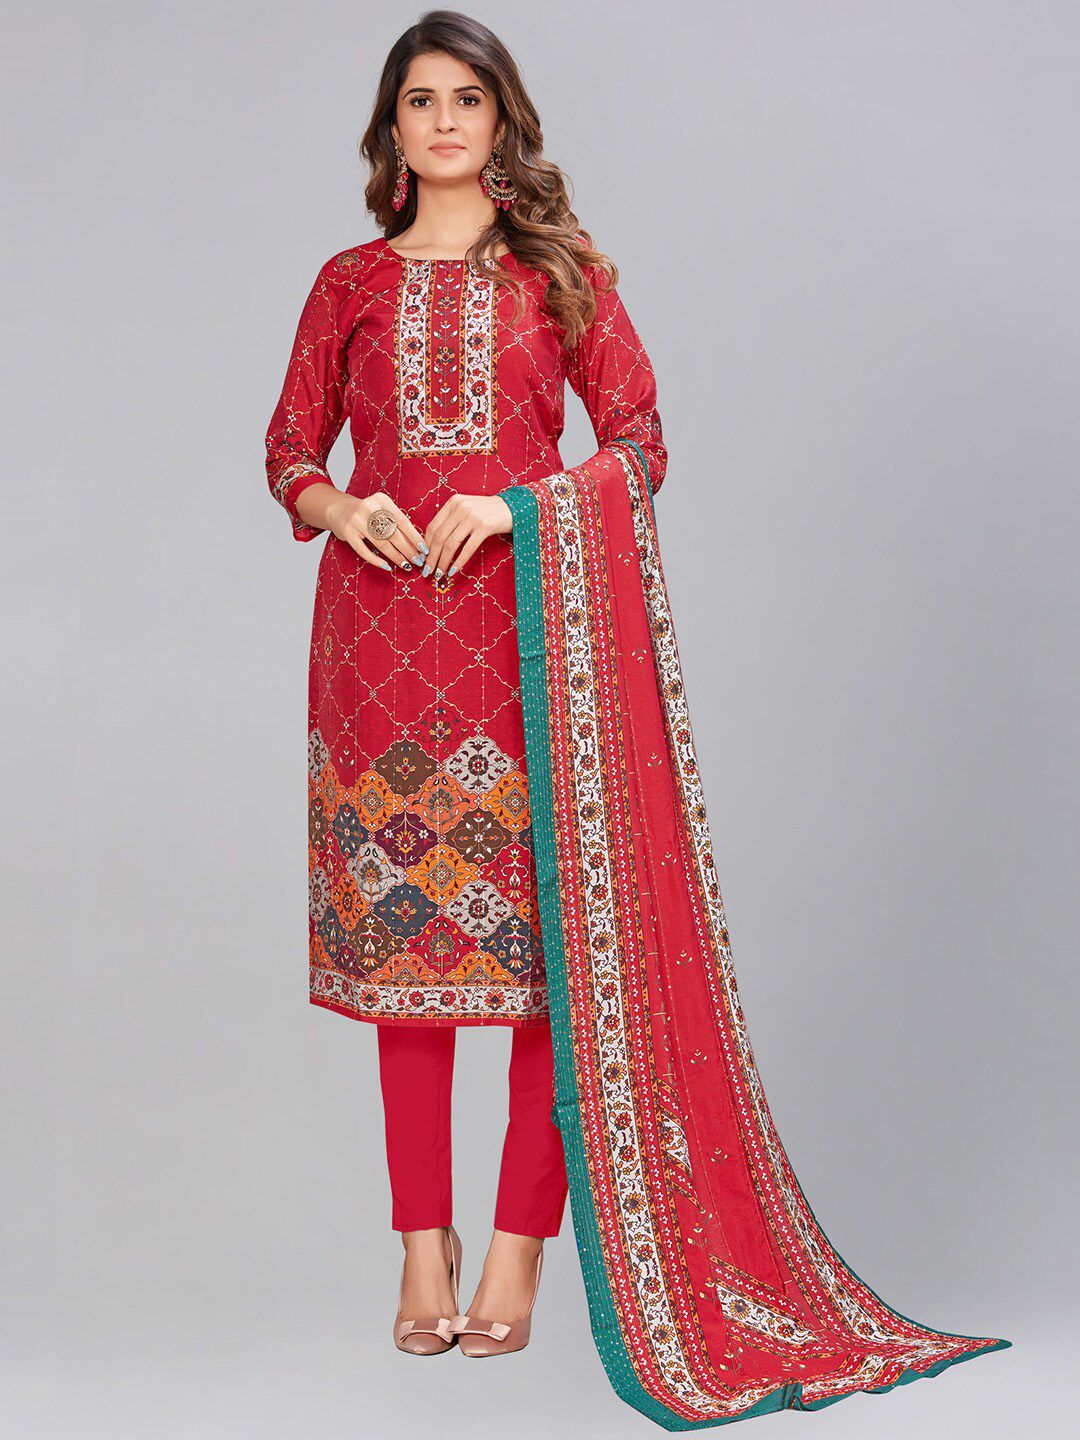 AYKA CLOTHINGS Red & Green Printed Viscose Rayon Unstitched Dress Material Price in India